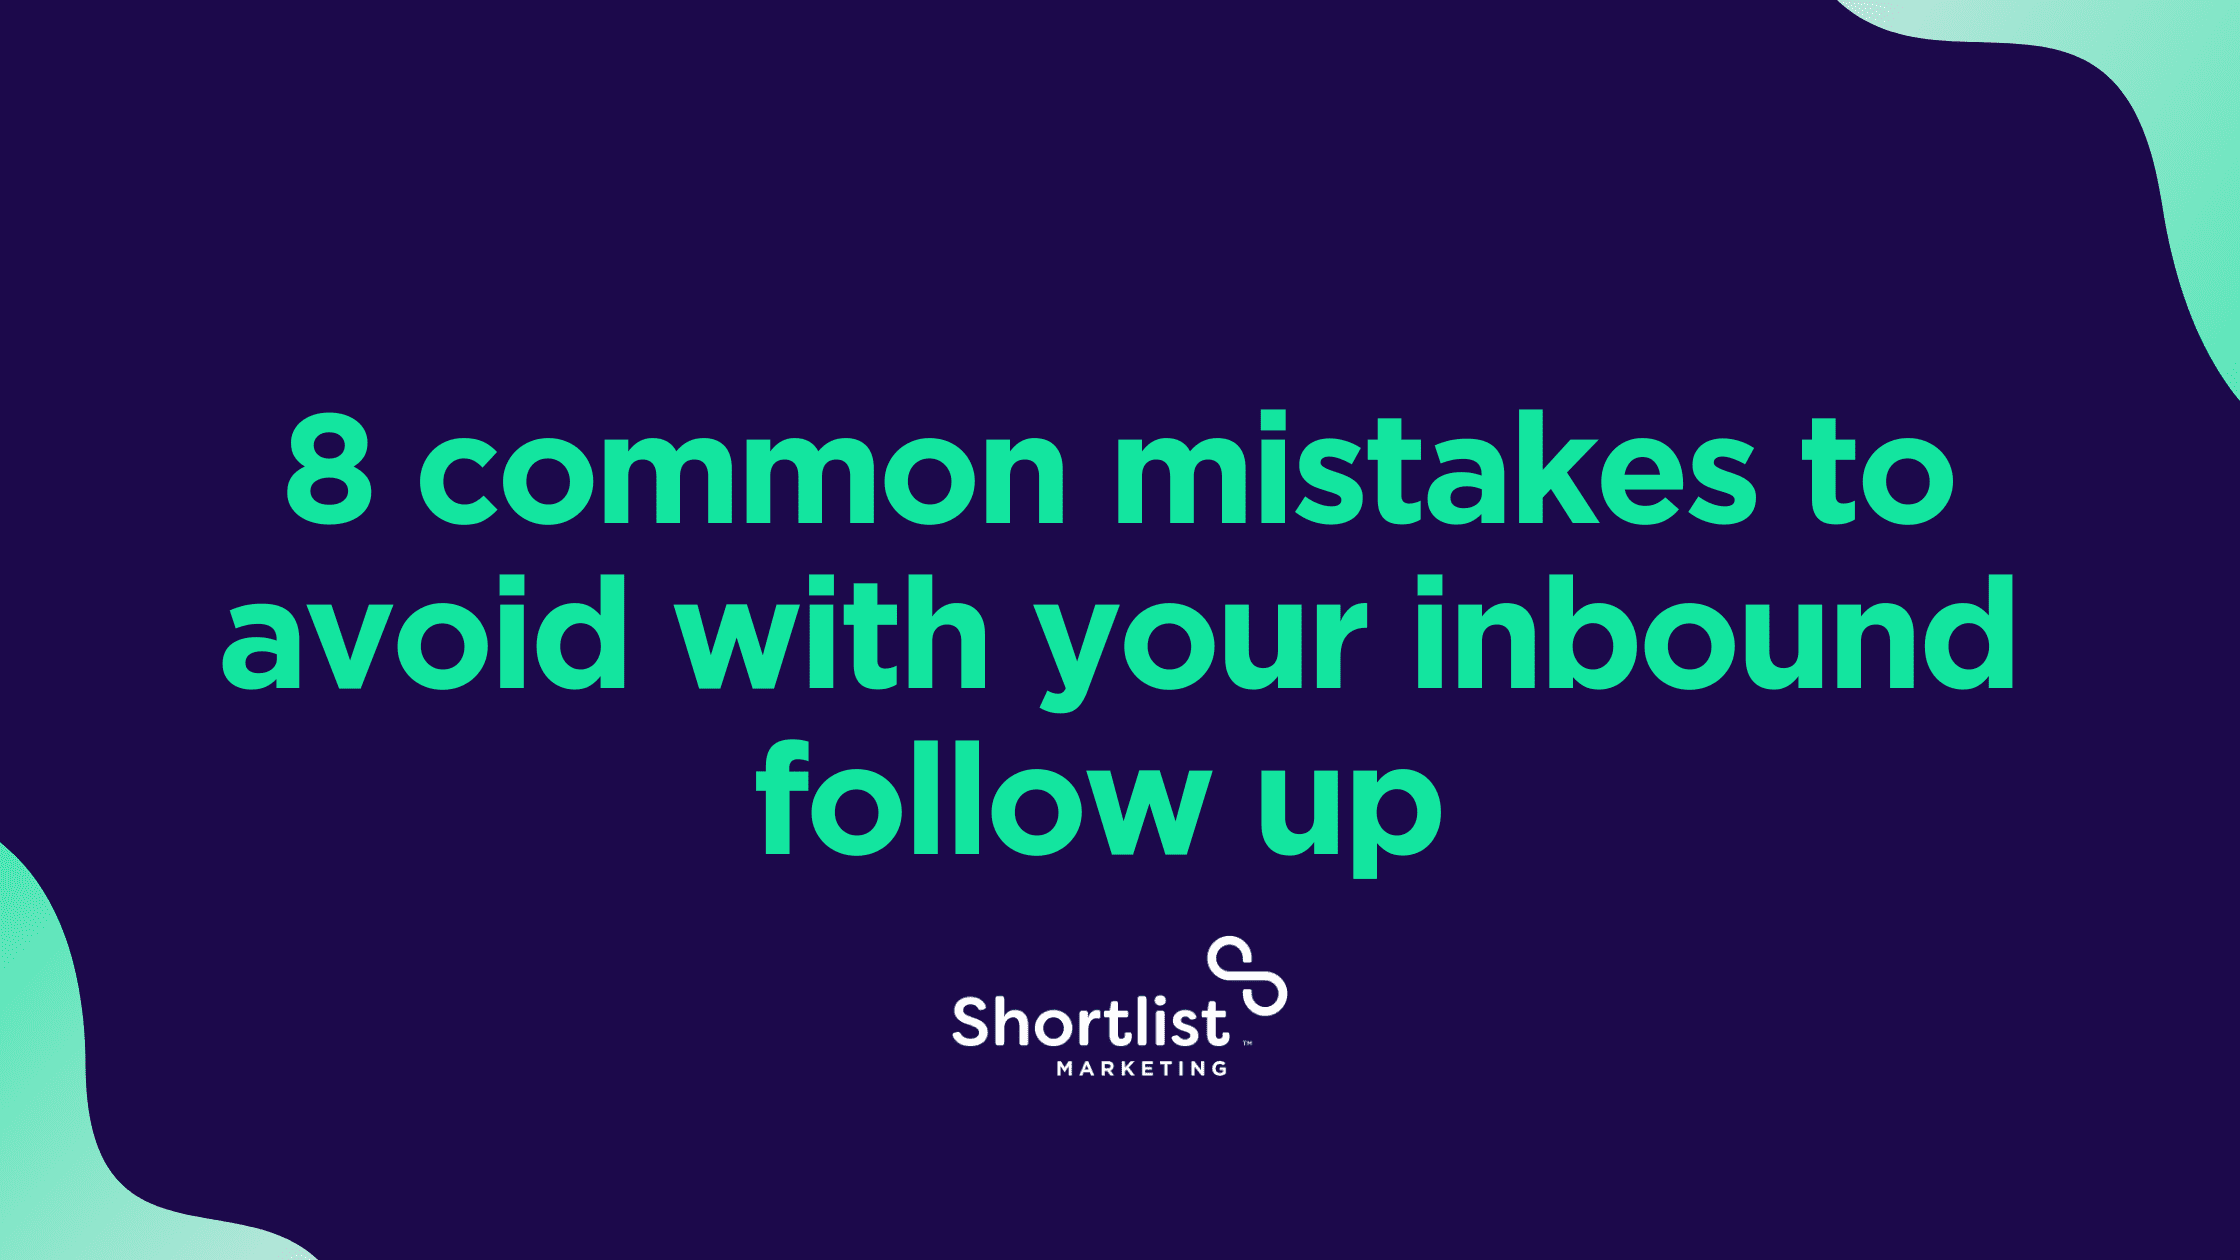 8 common mistakes to avoid with your inbound follow up